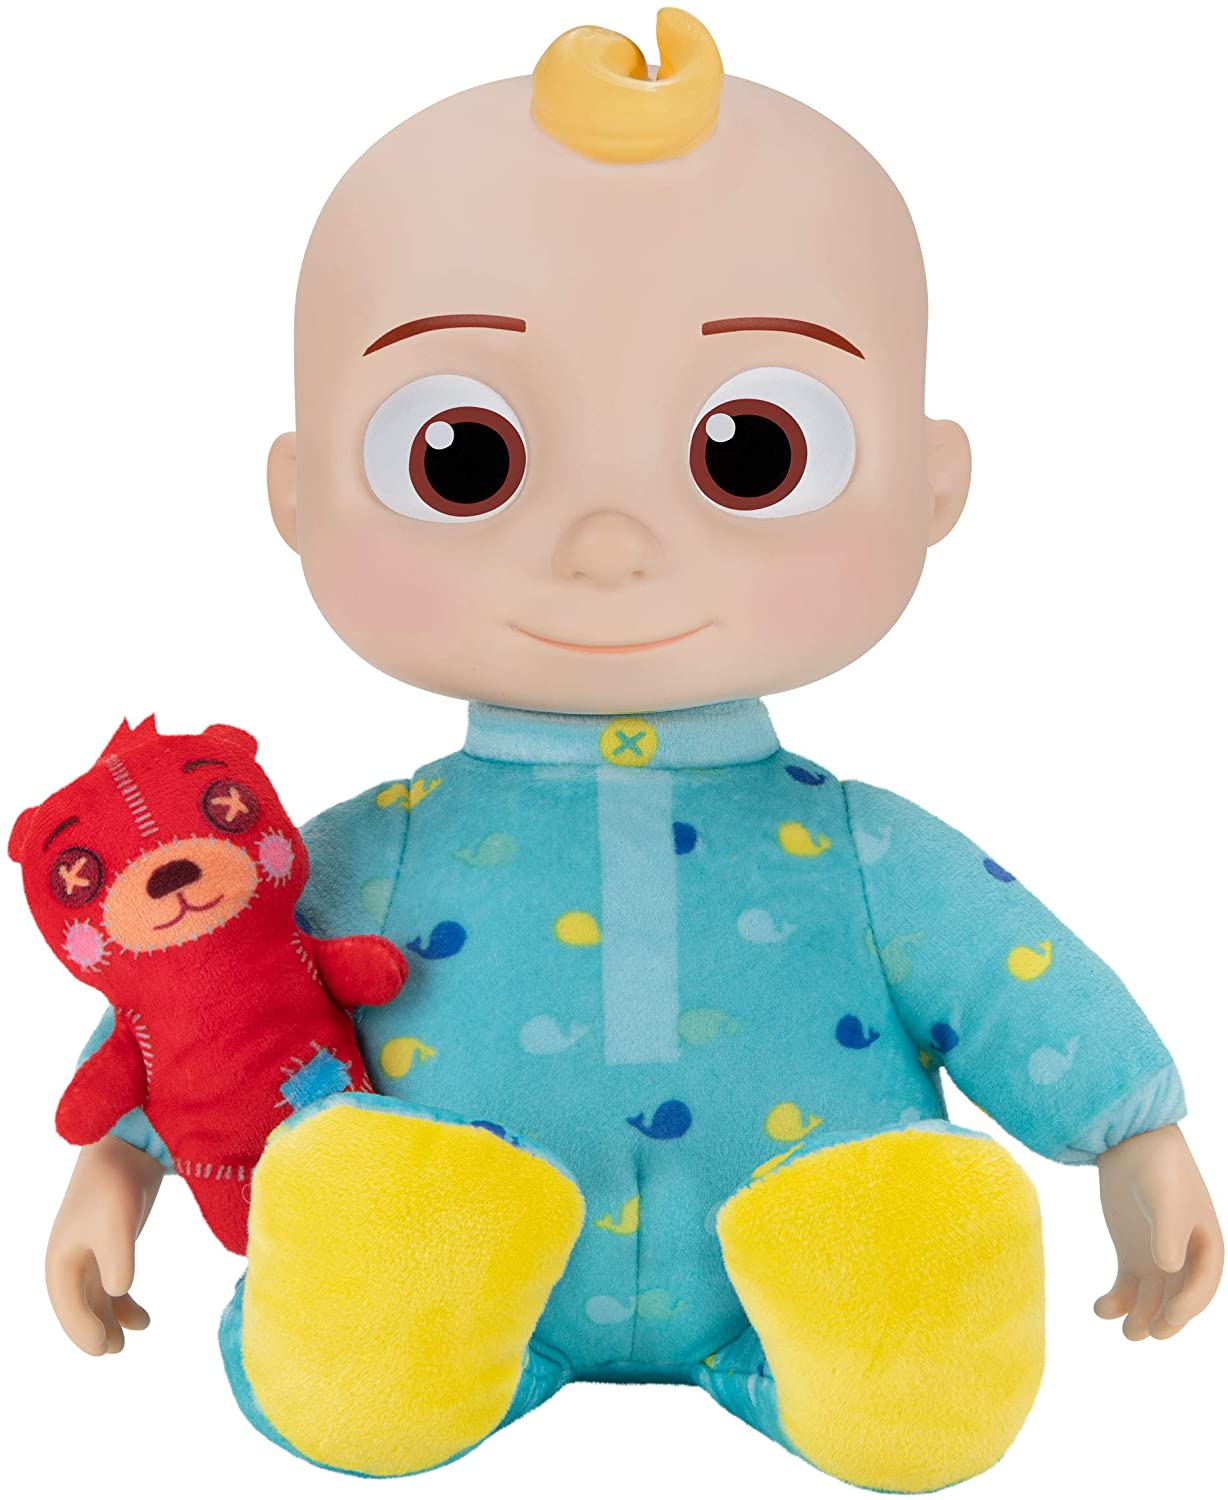 CoComelon Musical Bedtime JJ Plush Doll w/ Sounds & Phrases $14 + FS w/ Amazon Prime, FS on $25+ or Free Store Pickup at Target